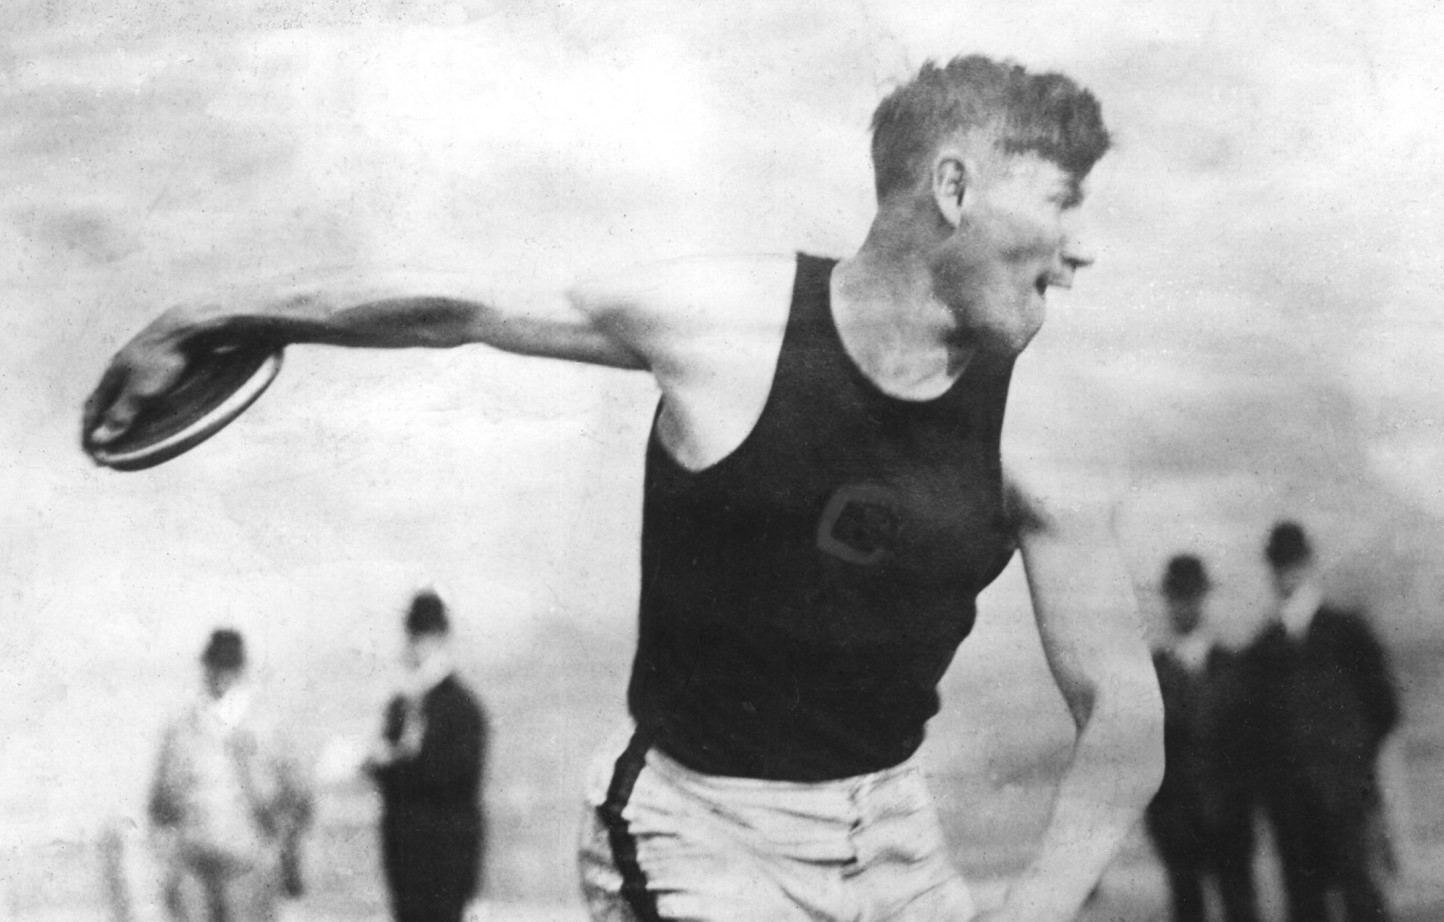 The IOC's decision this year to recognise Jim Thorpe as the sole decathlon and pentathlon gold medallist from Stockholm 1912 could give campaigners hope